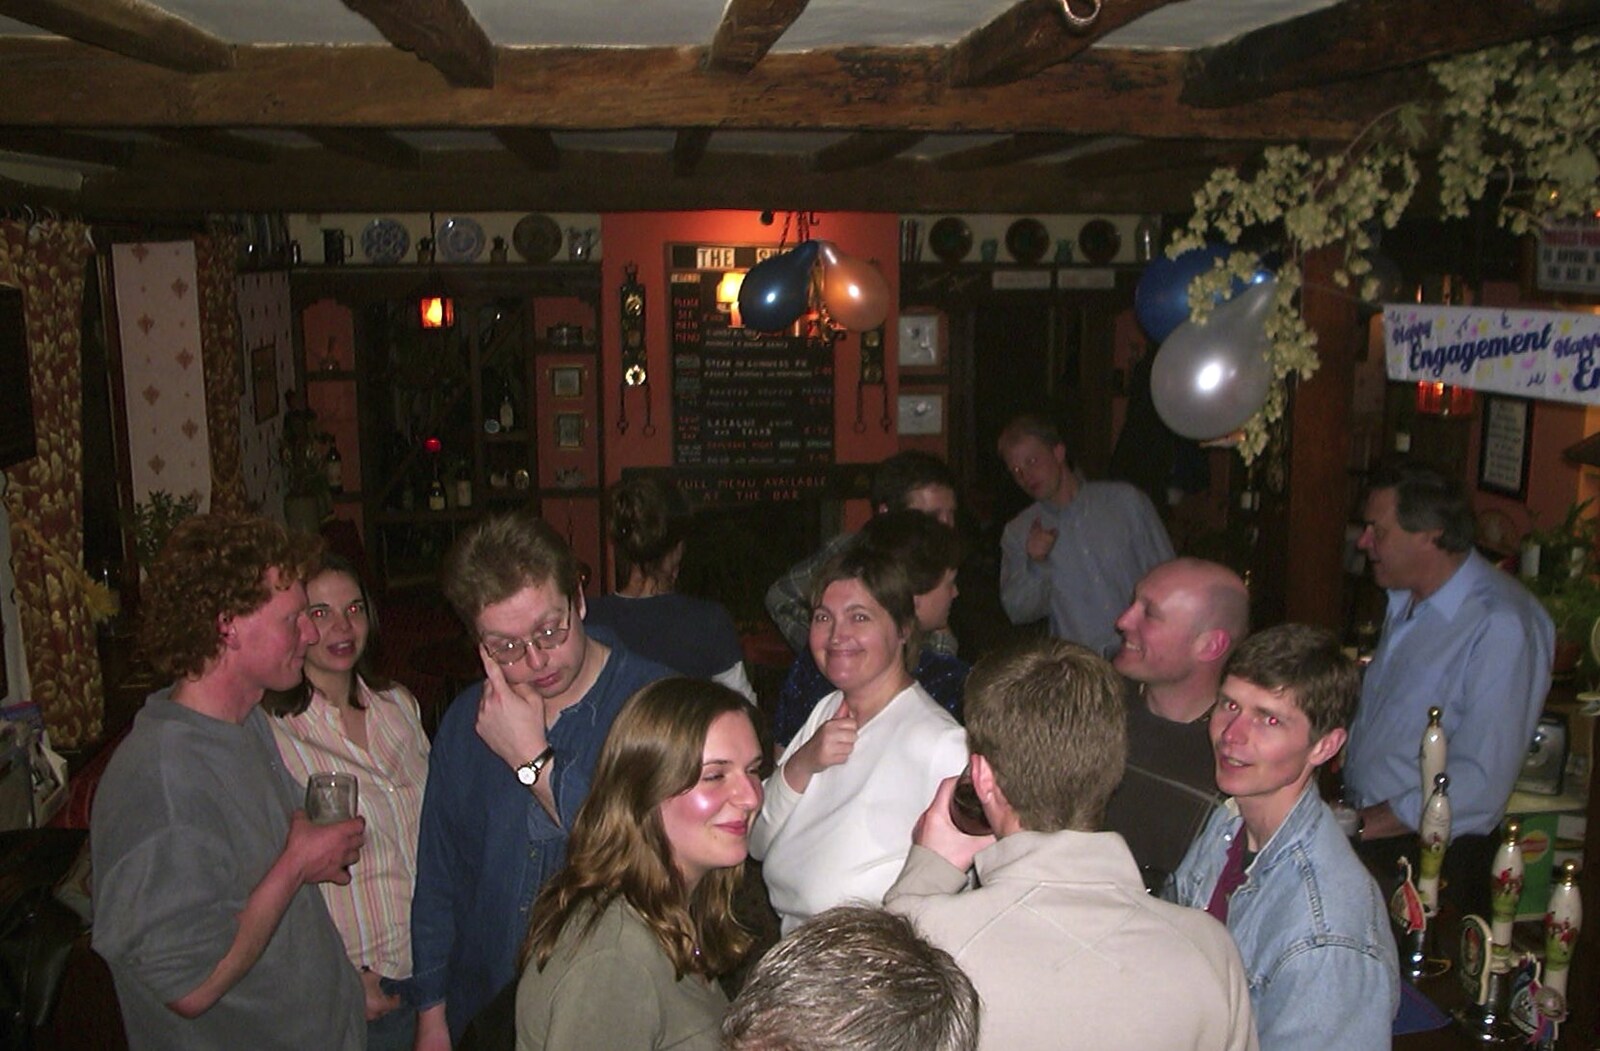 Paul and Claire's Engagement Party, Brome Swan, Suffolk - 27th March 2004: Another pub scene